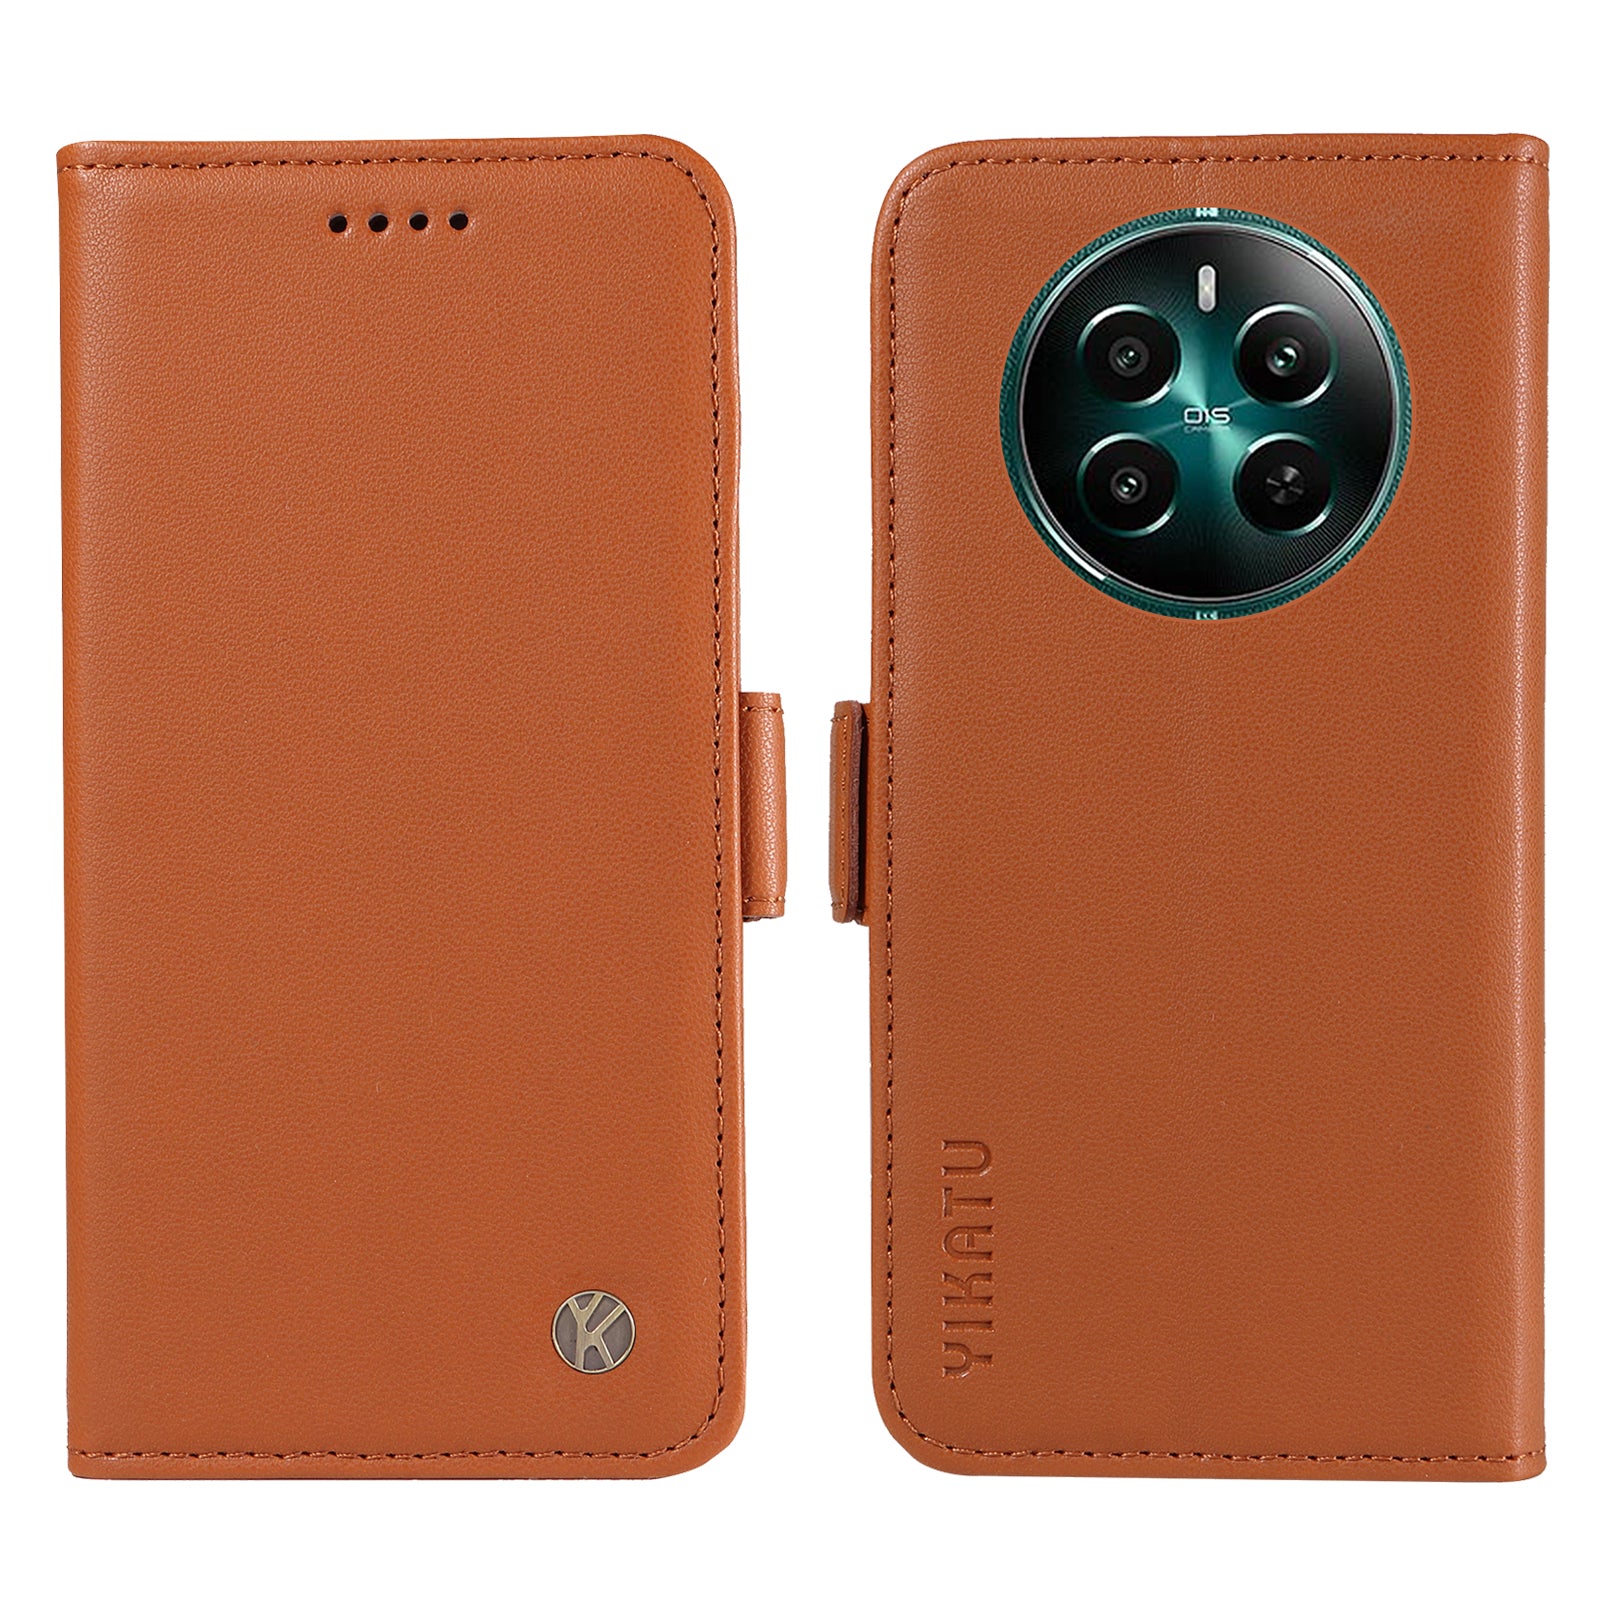 YIKATU YK-003 For Realme 12+ 5G Case Wallet PU Leather+TPU Cover Phone Accessories Distributors - Brown